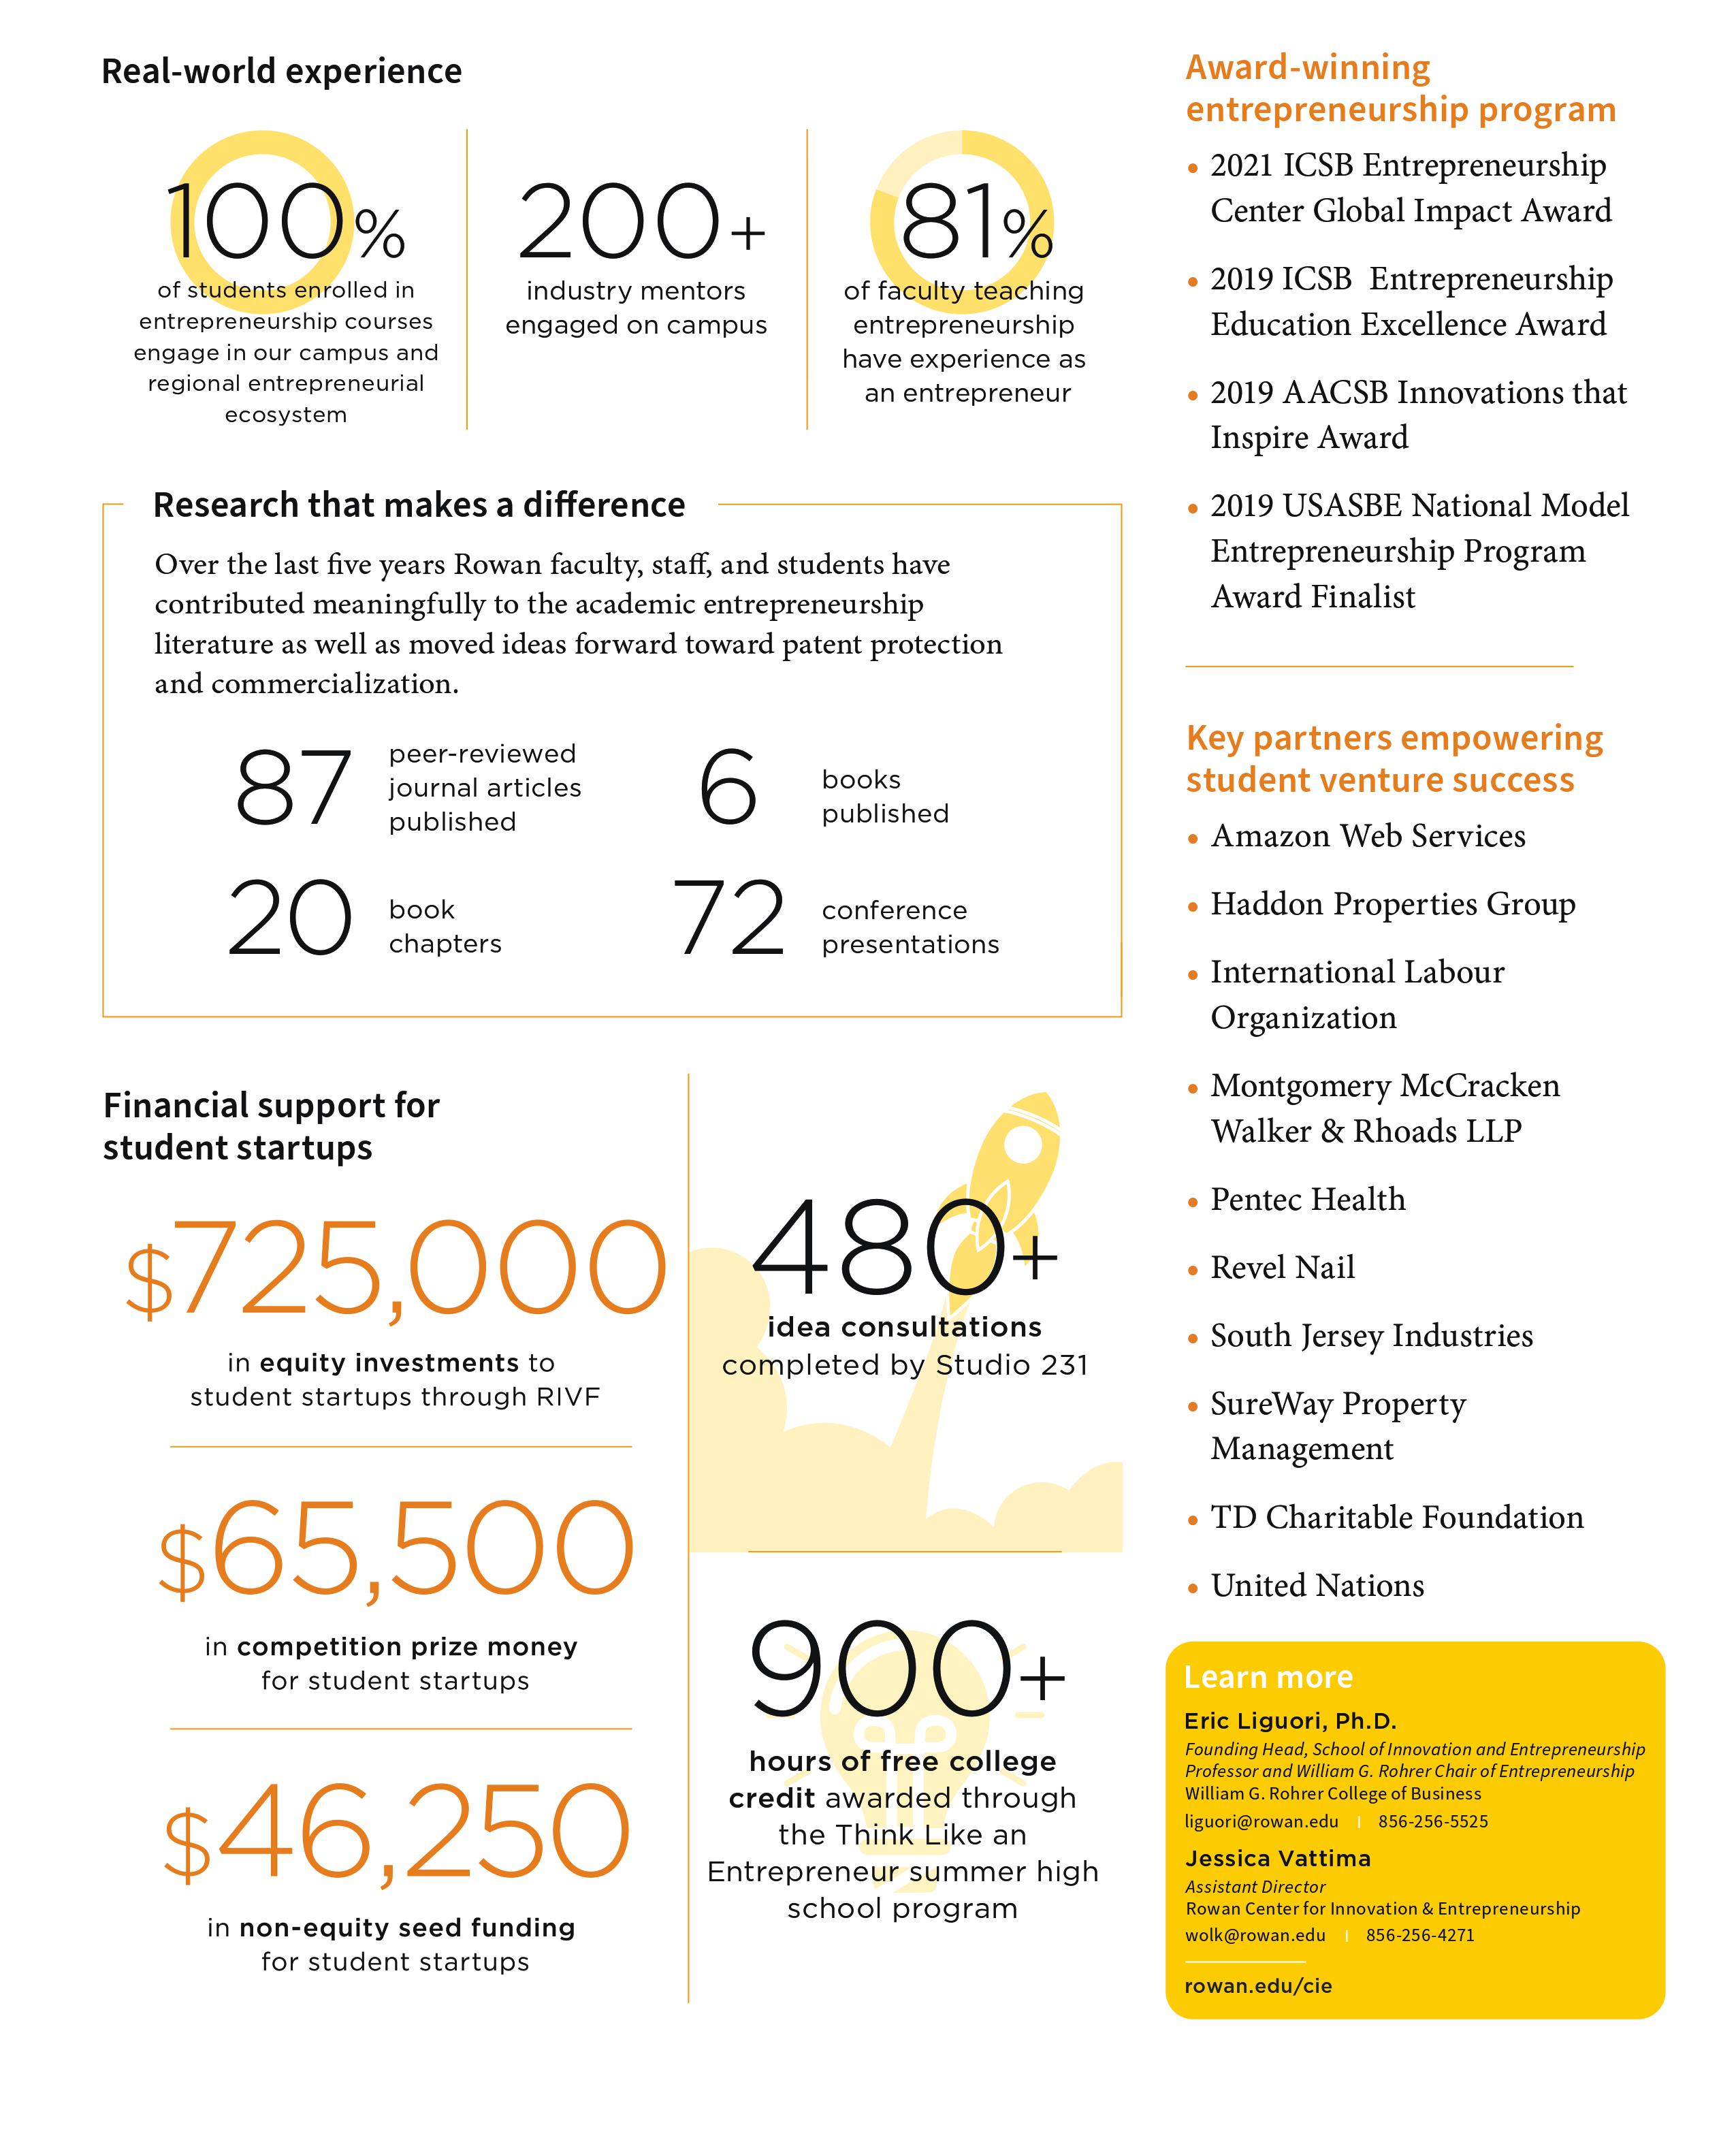 Fast facts about entrepreneurship at Rowan. PDF to download document found at bottom of page.